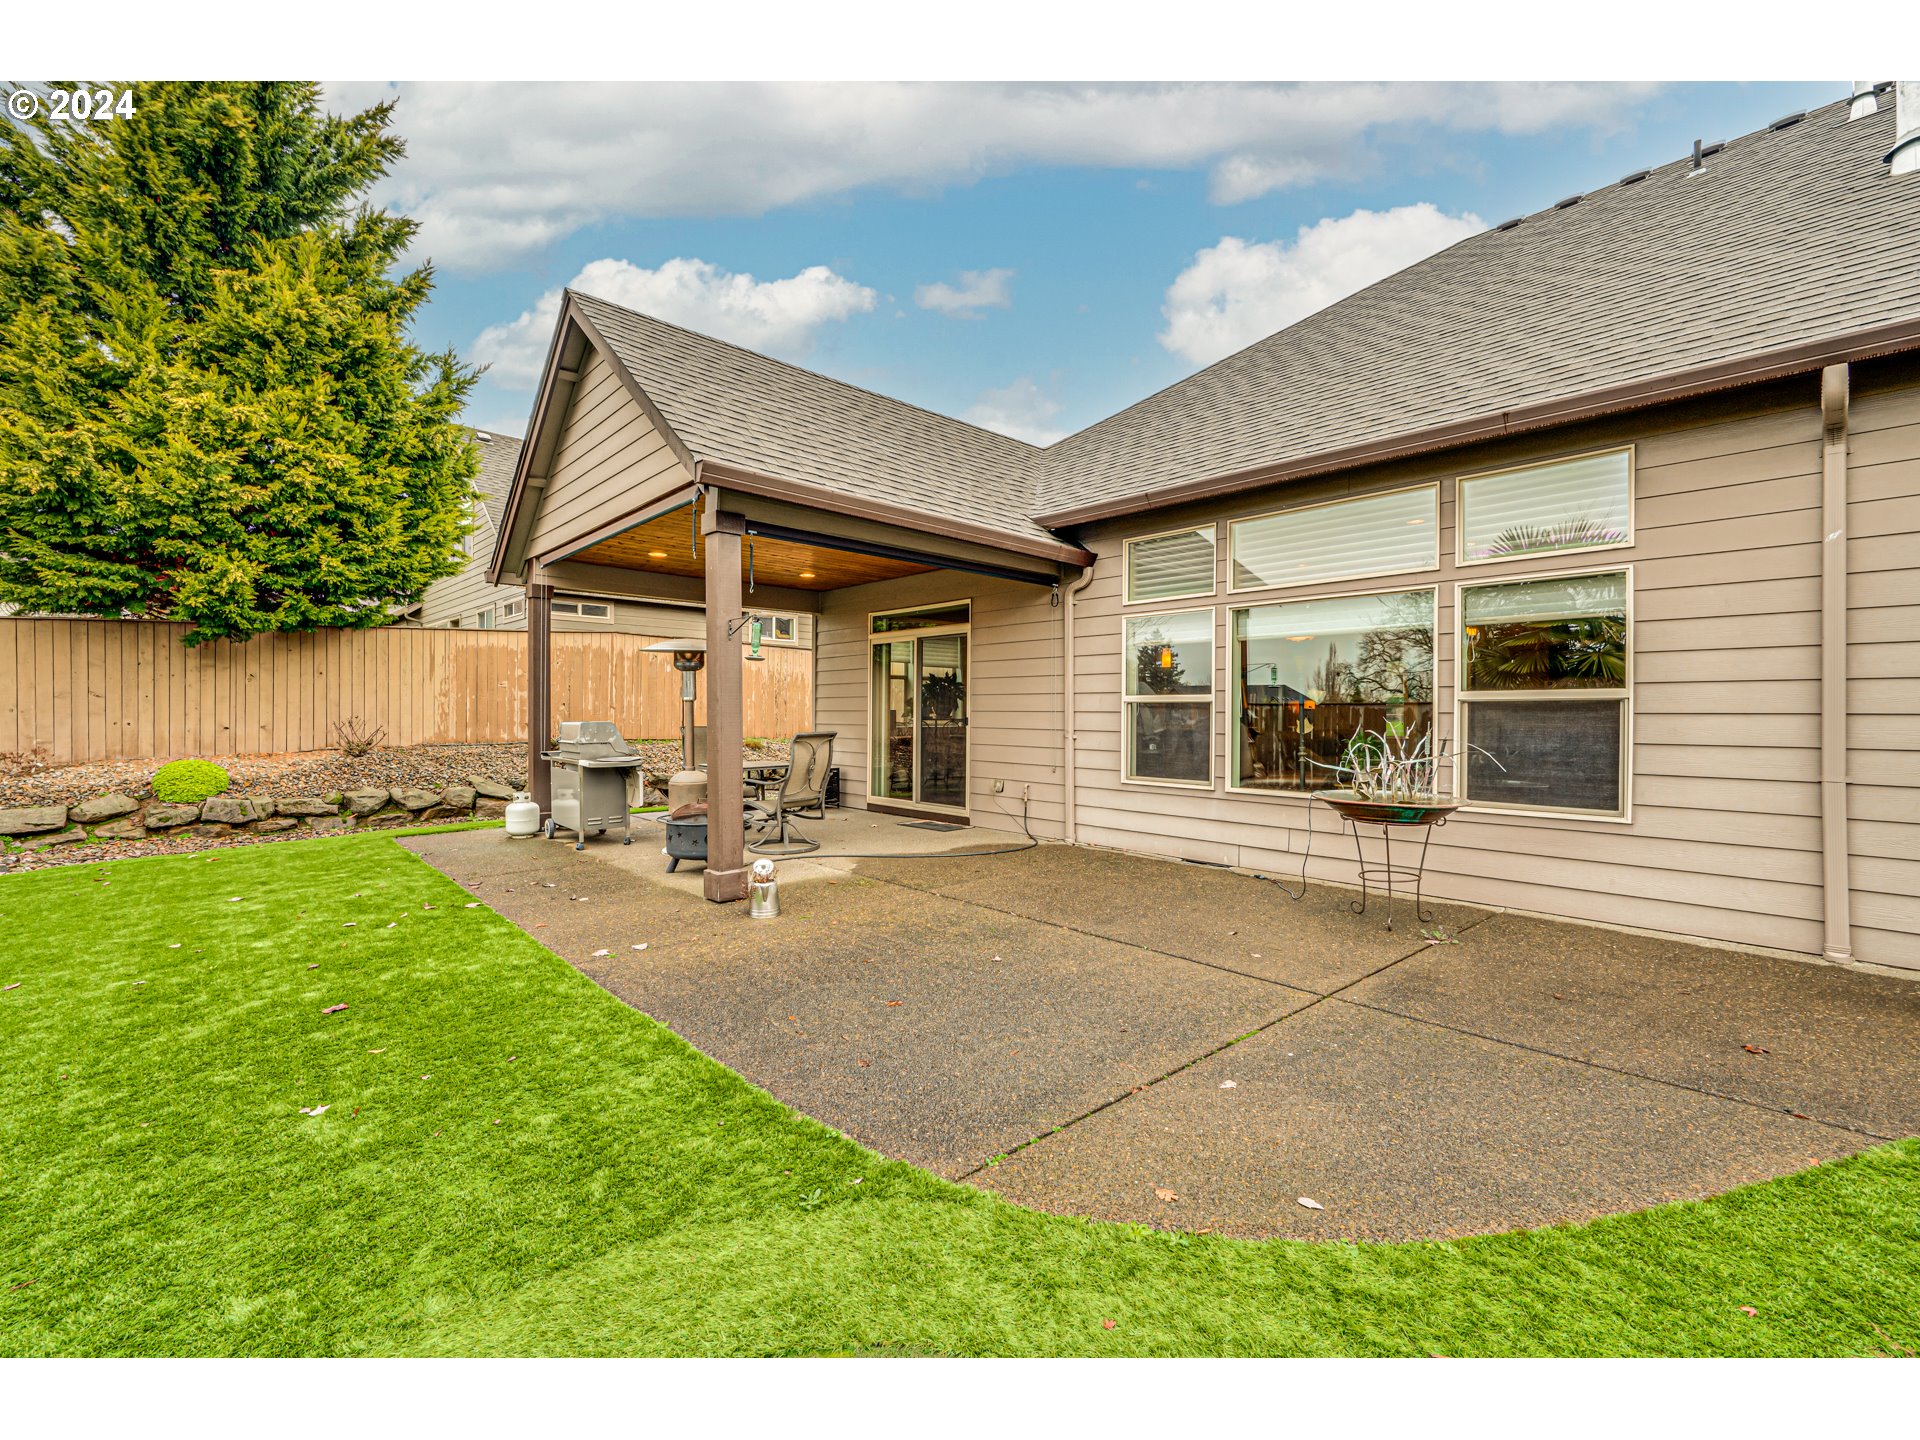 12508 NW 49th Ave, Vancouver, WA 98685